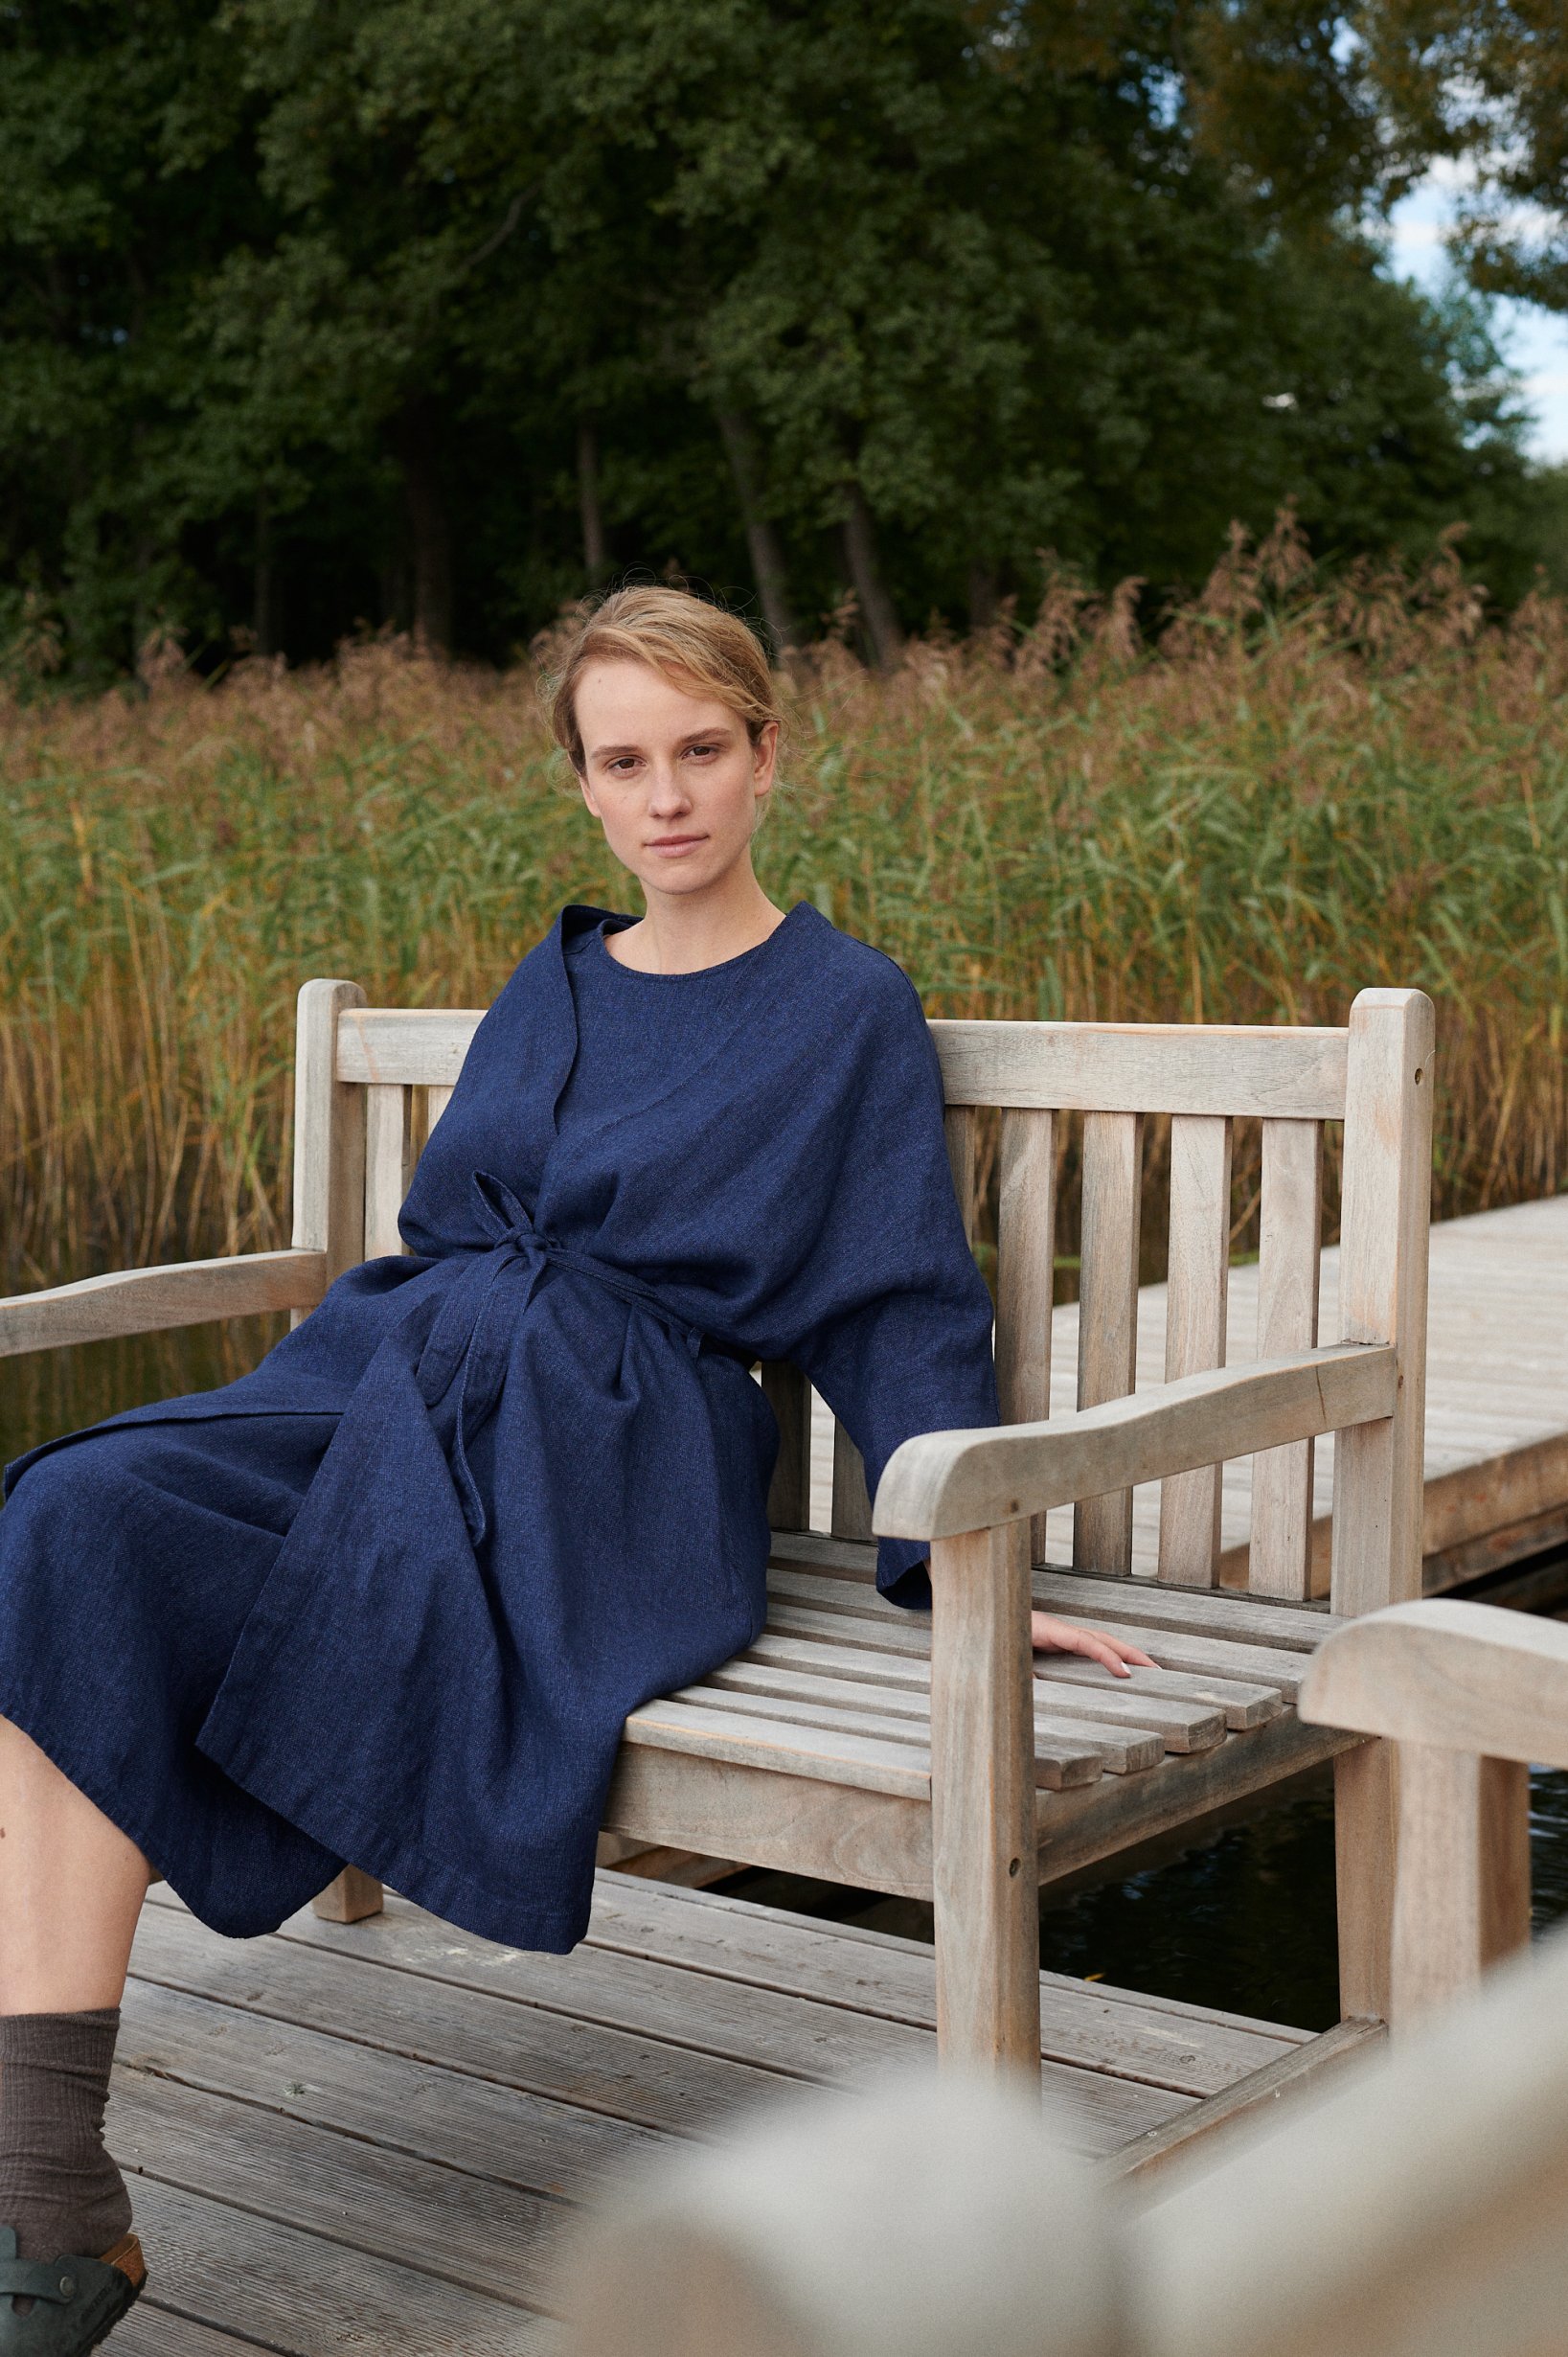 Woman in a navy blue linen wool blend jacket sitting on a bench